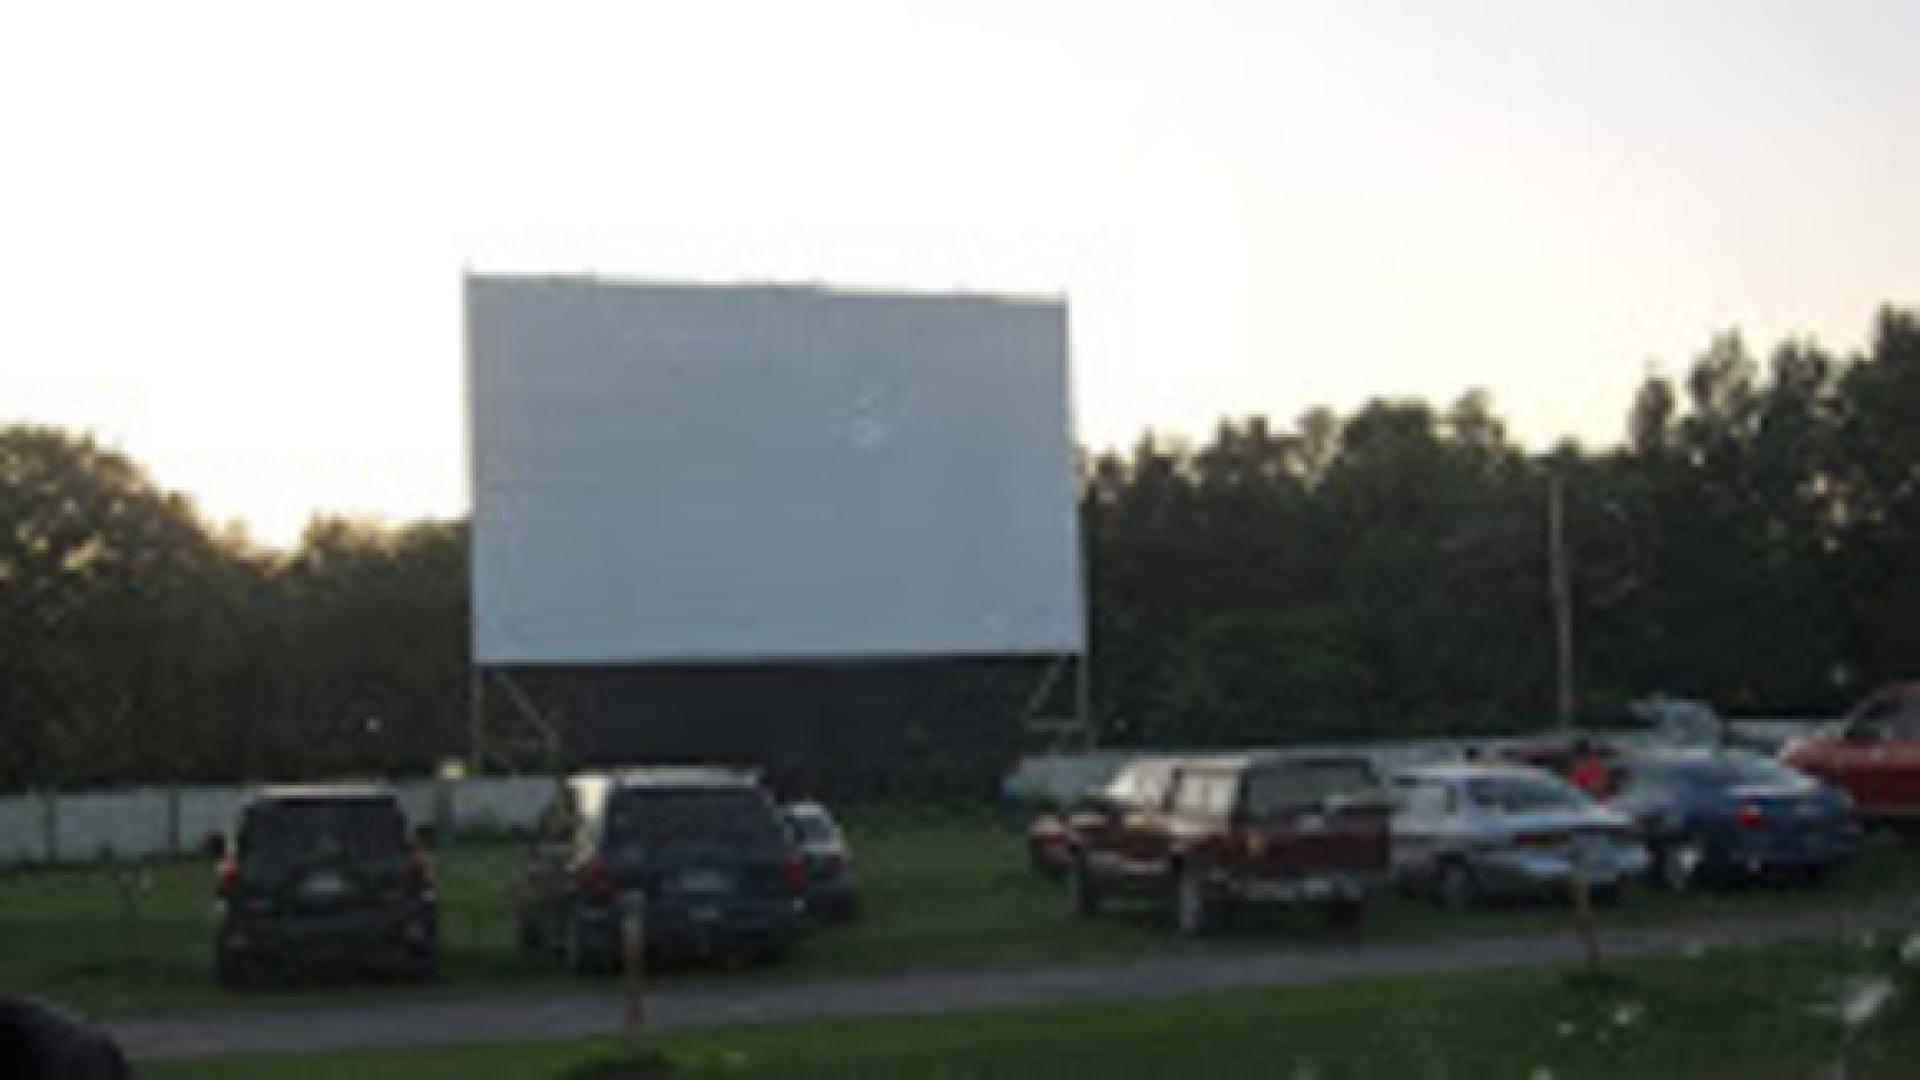 Valley Brook Drive-In Theatre